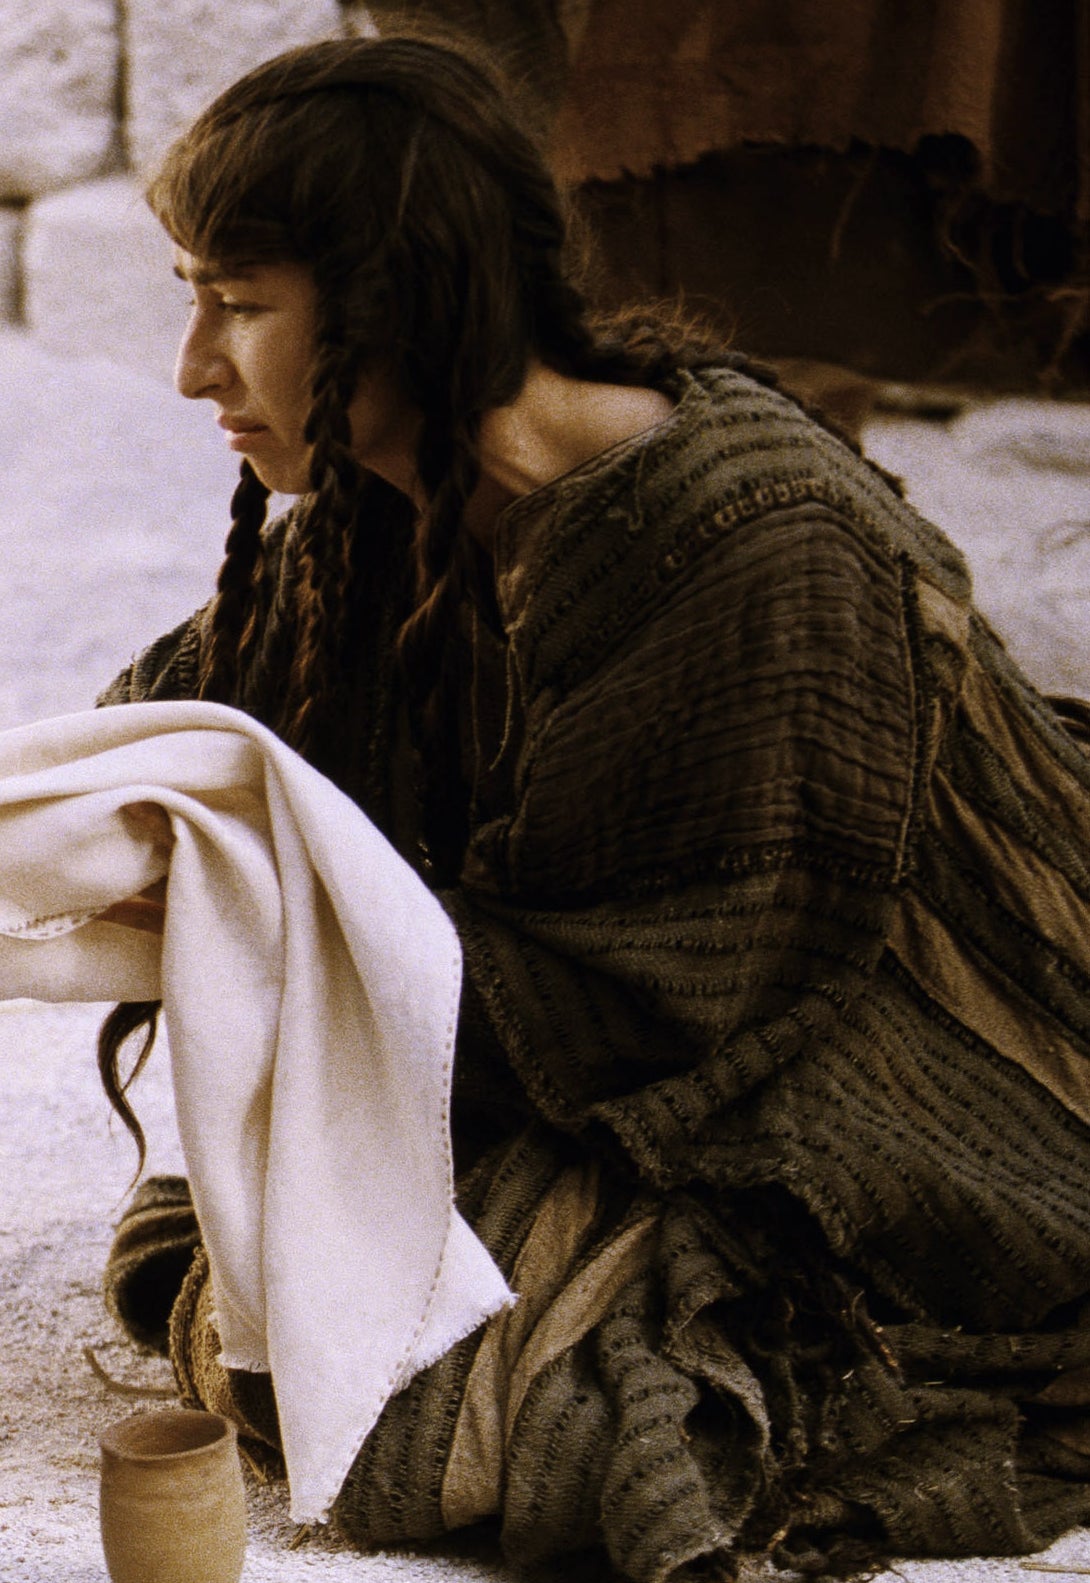 Sabrina Impacciatore in The Passion of the Christ